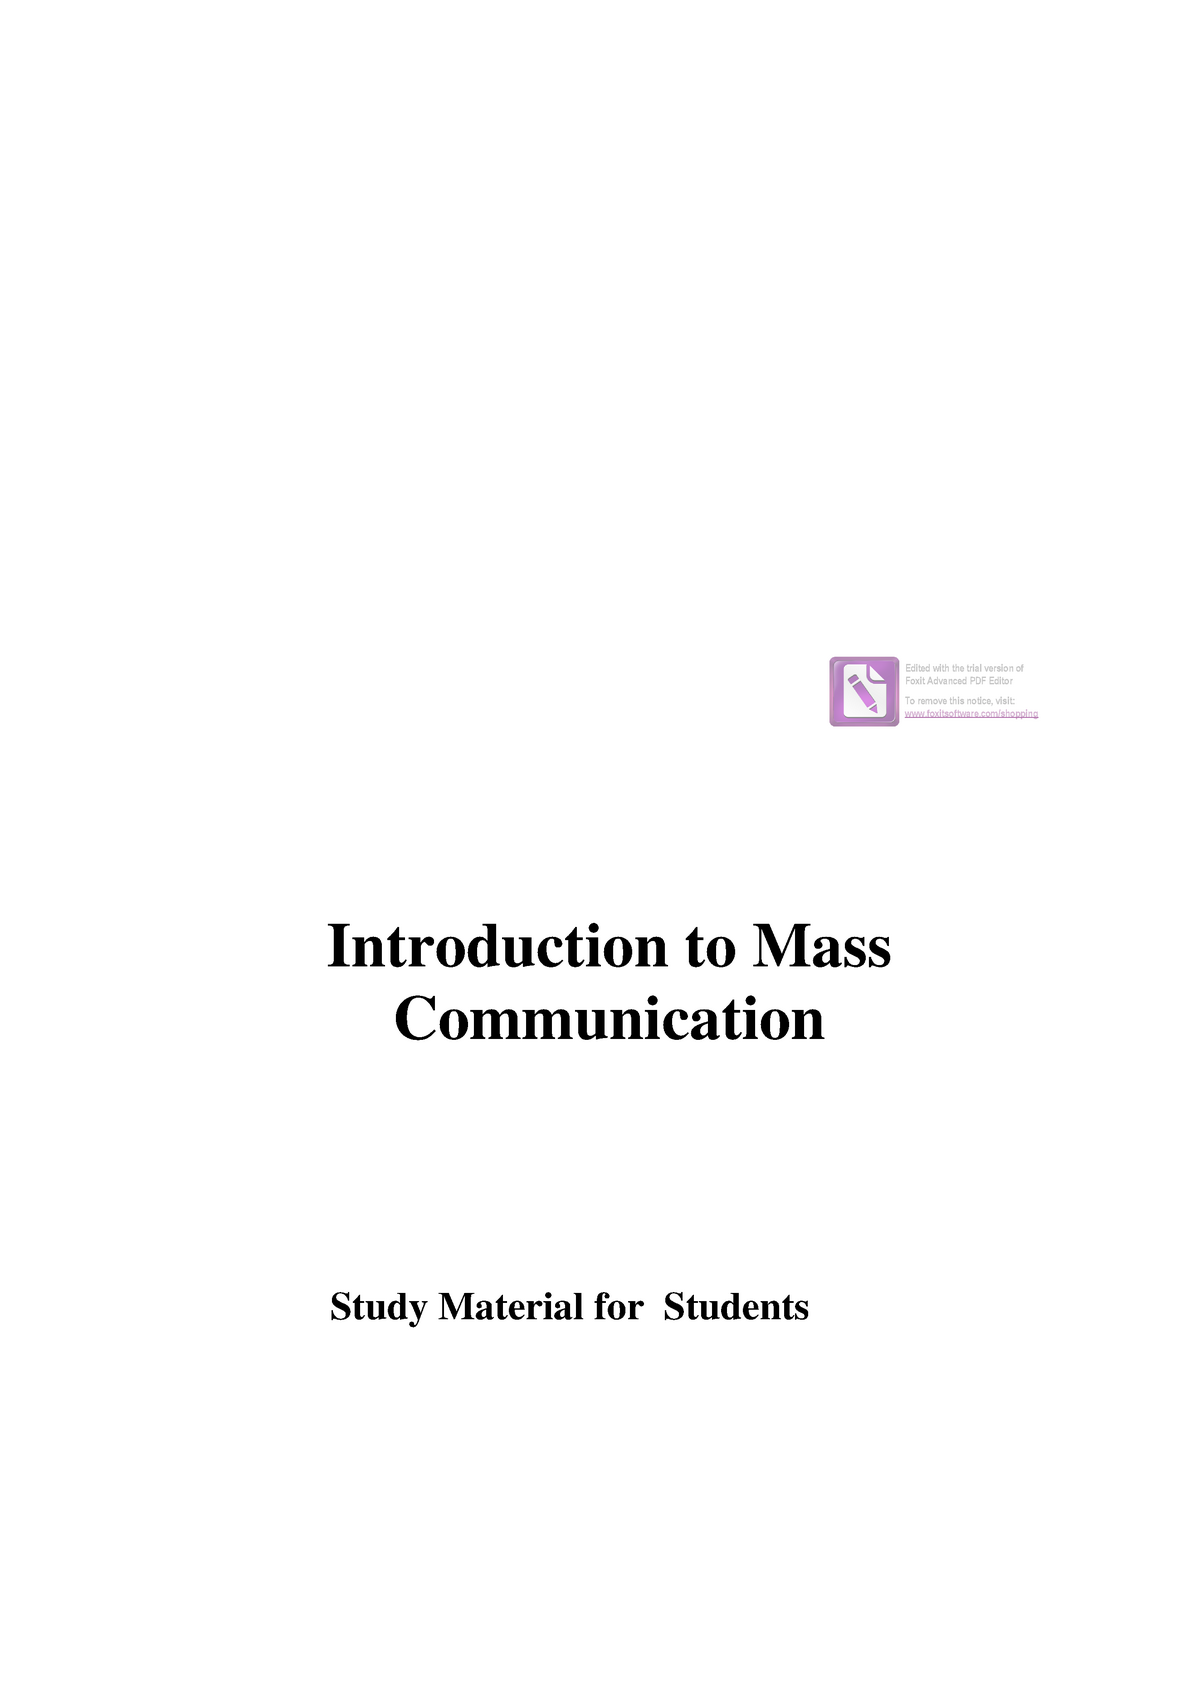 phd thesis in mass communication pdf